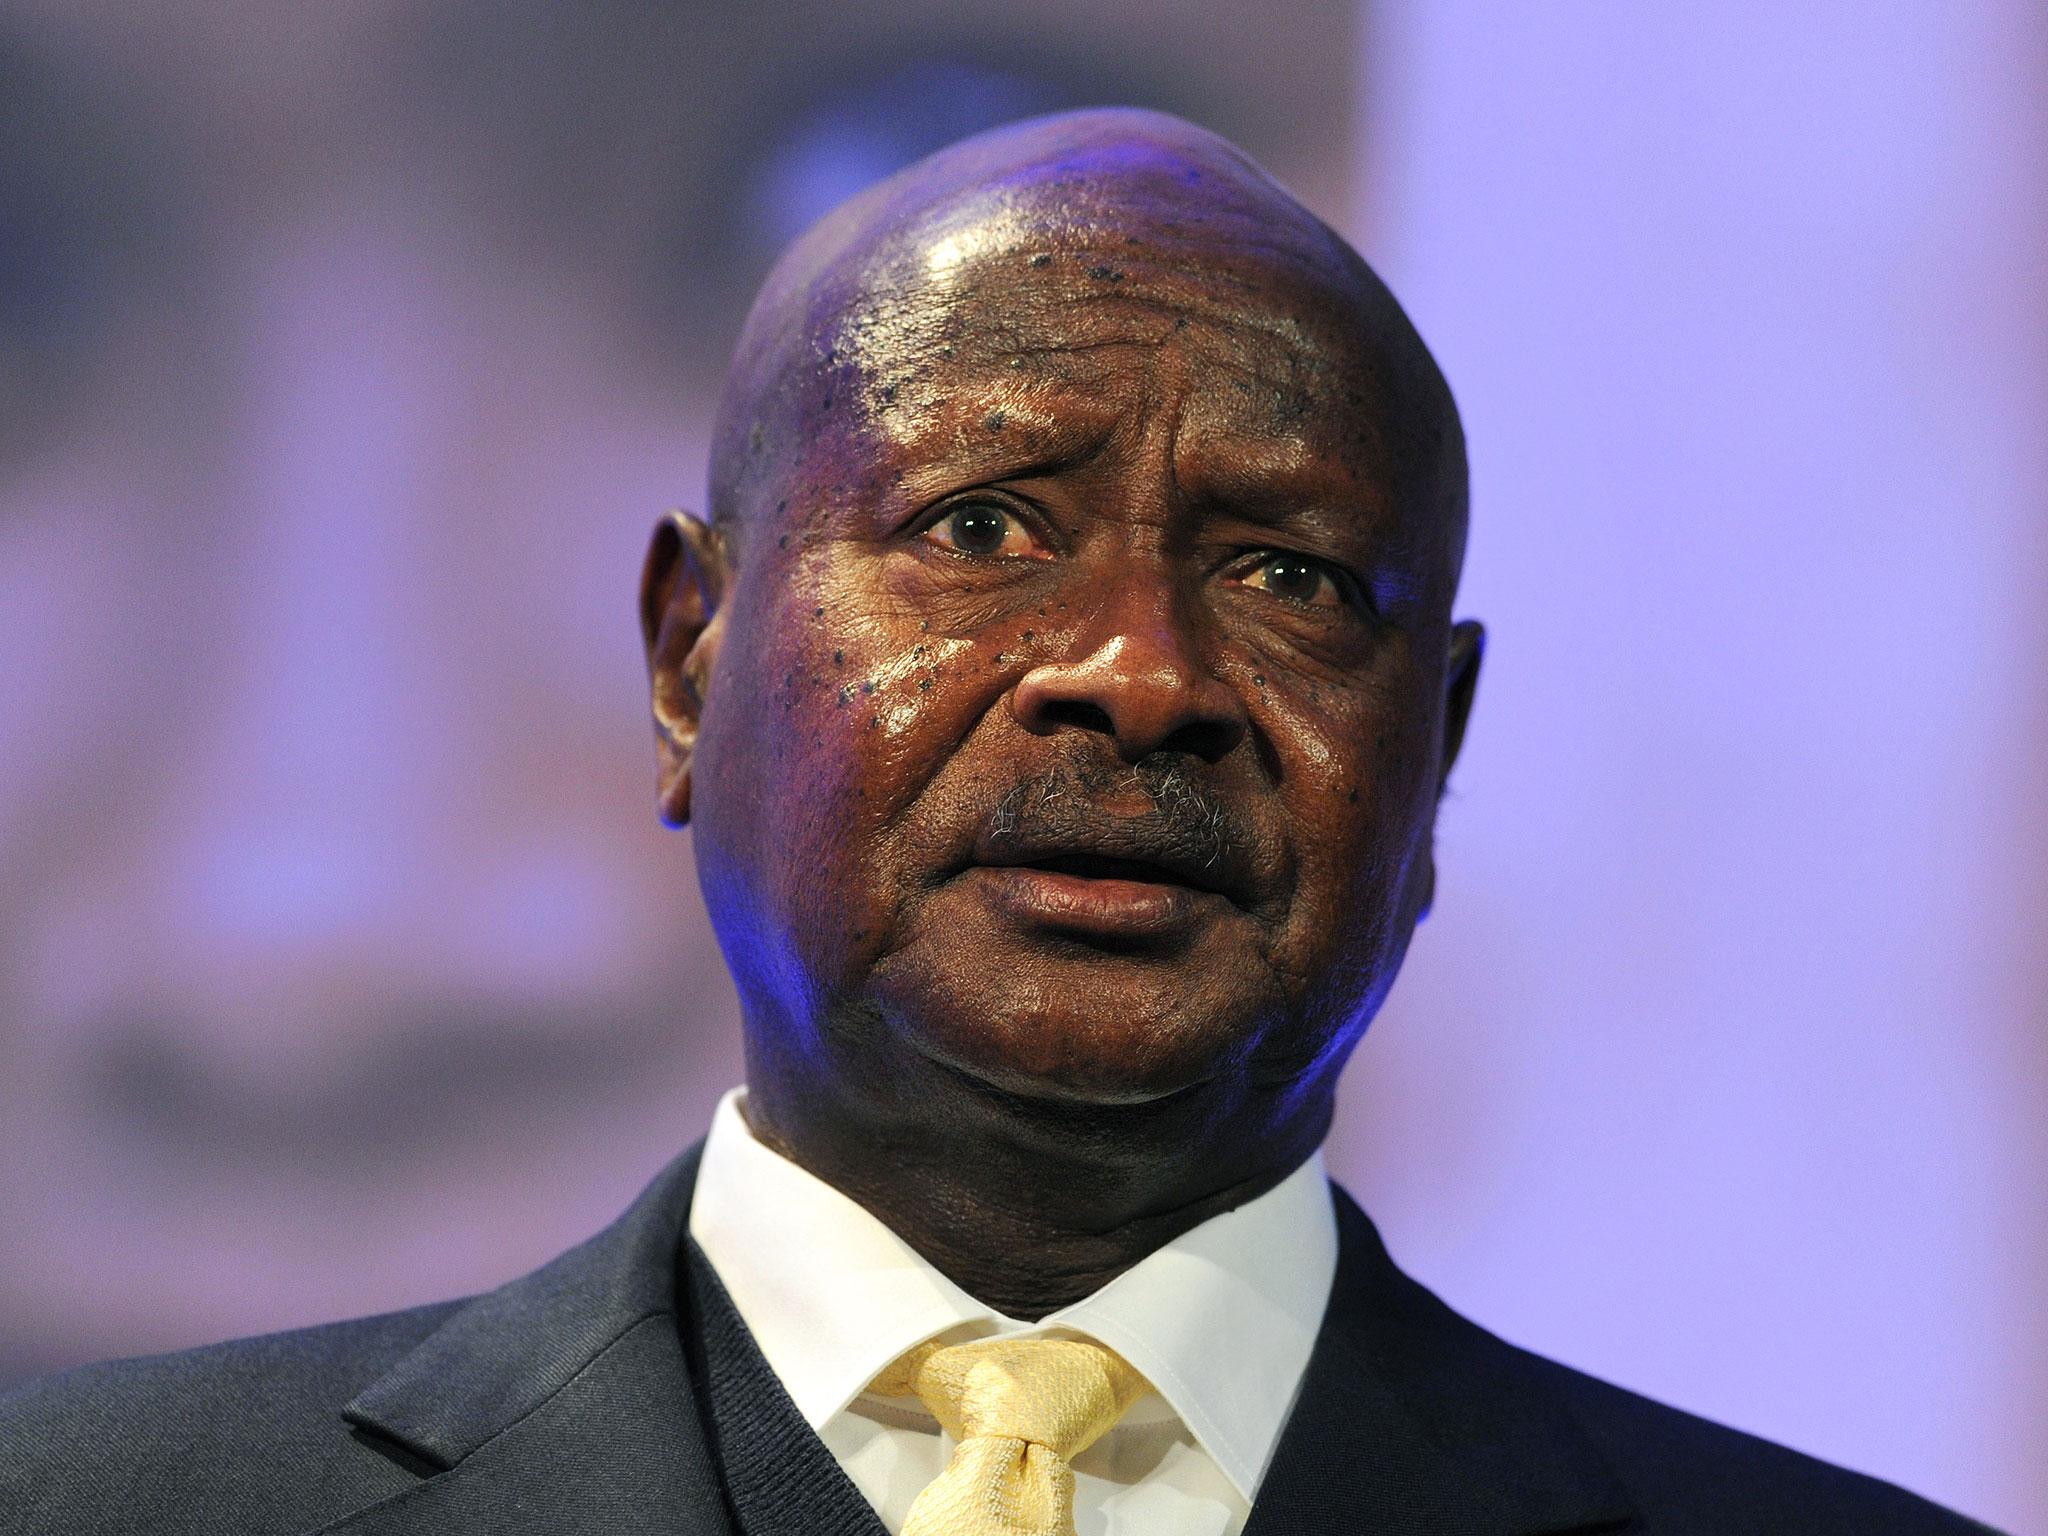 President Yoweri Museveni said Donald Trump must be thanked for telling Africans "frankly"